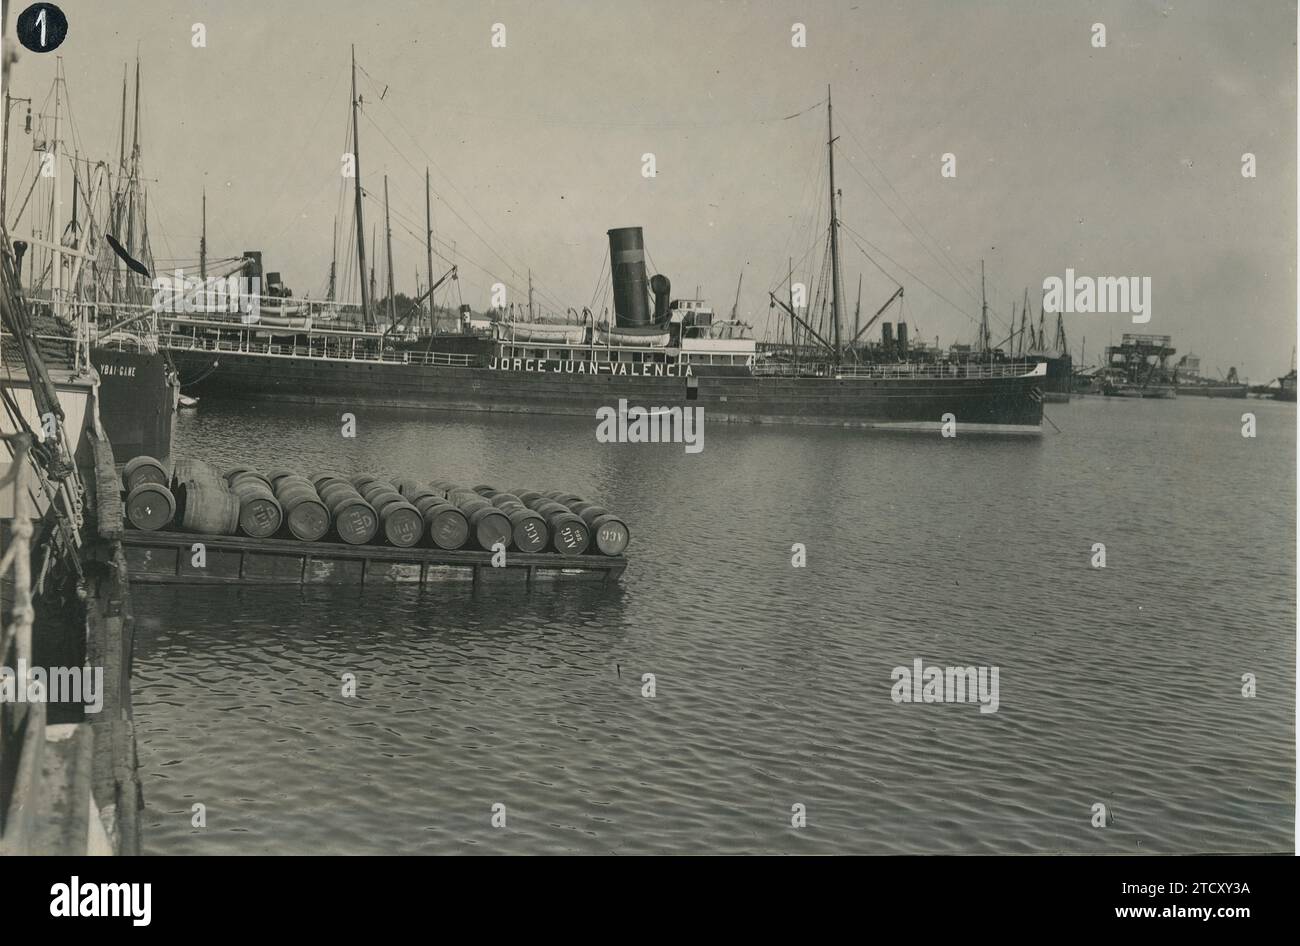 Valencia, October 1919. The steamer "Jorge Juan", after more than a month and a half in the port of Valencia, coming from Barcelona, without being unloaded due to the shippers' strike. Even after making two round trips to your place of origin. Credit: Album / Archivo ABC / Vicente Barbera Masip Stock Photo